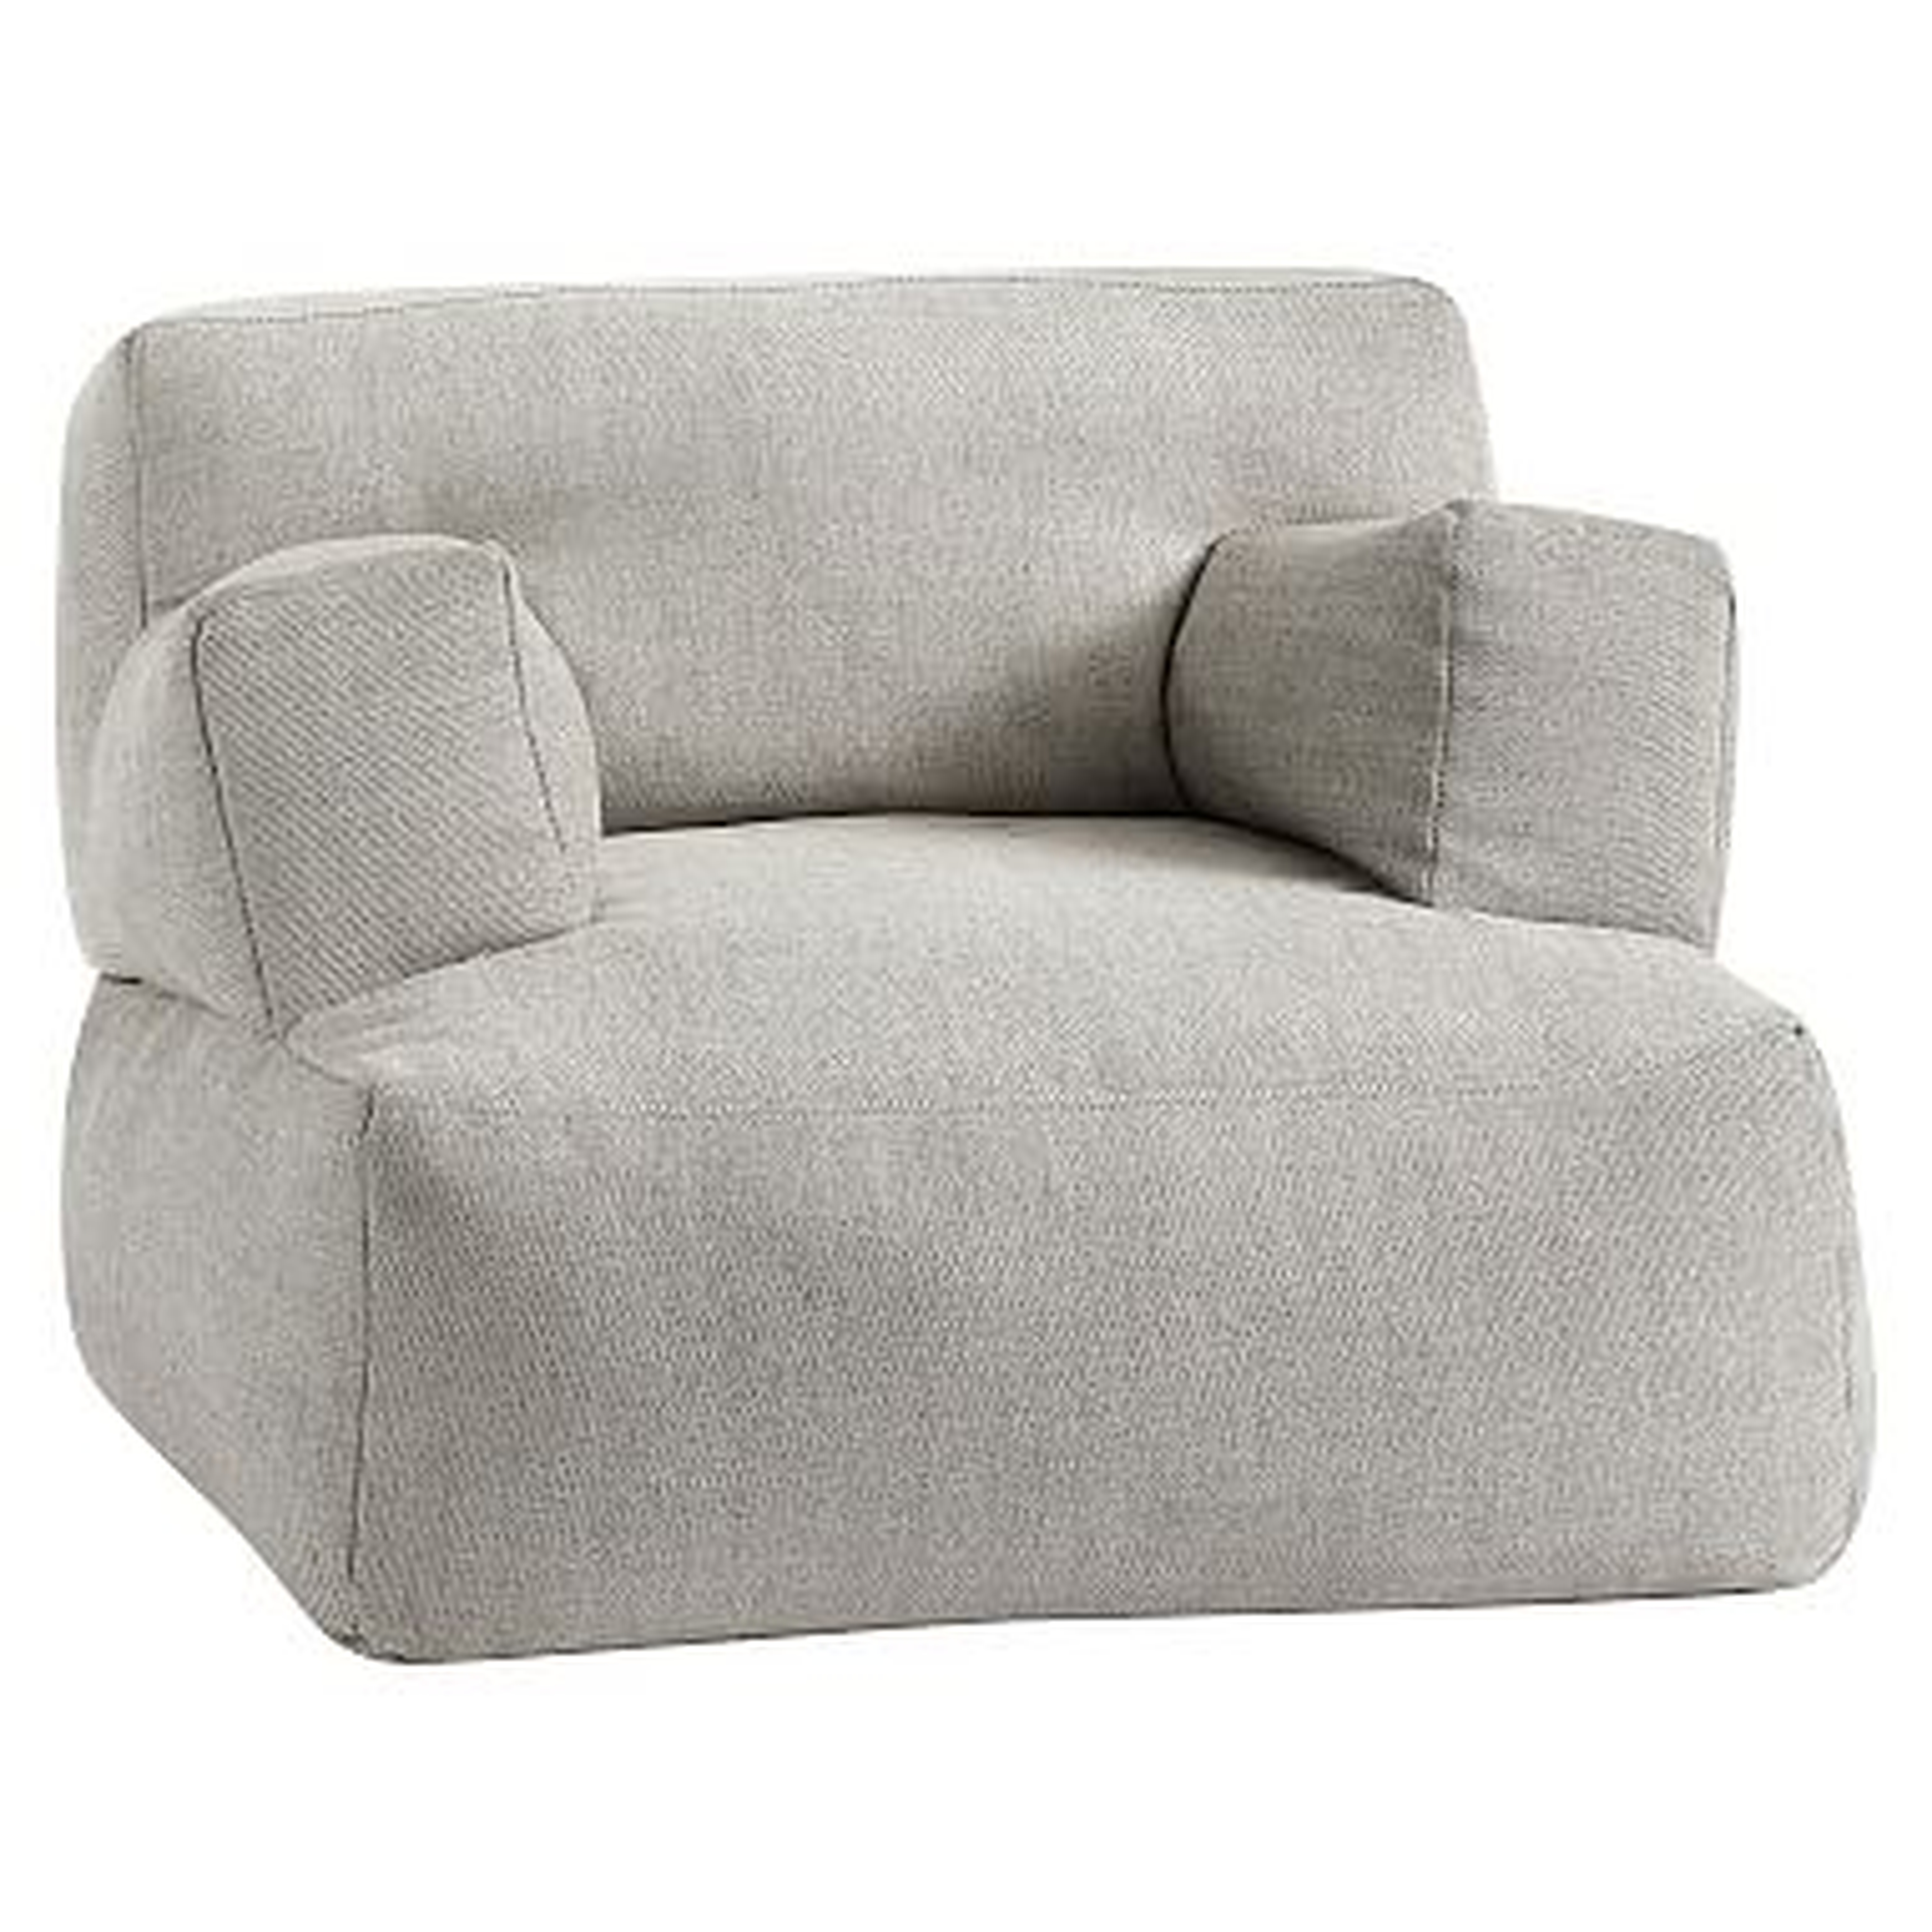 Boucle Twill Gravel Eco-Lounger - Pottery Barn Teen